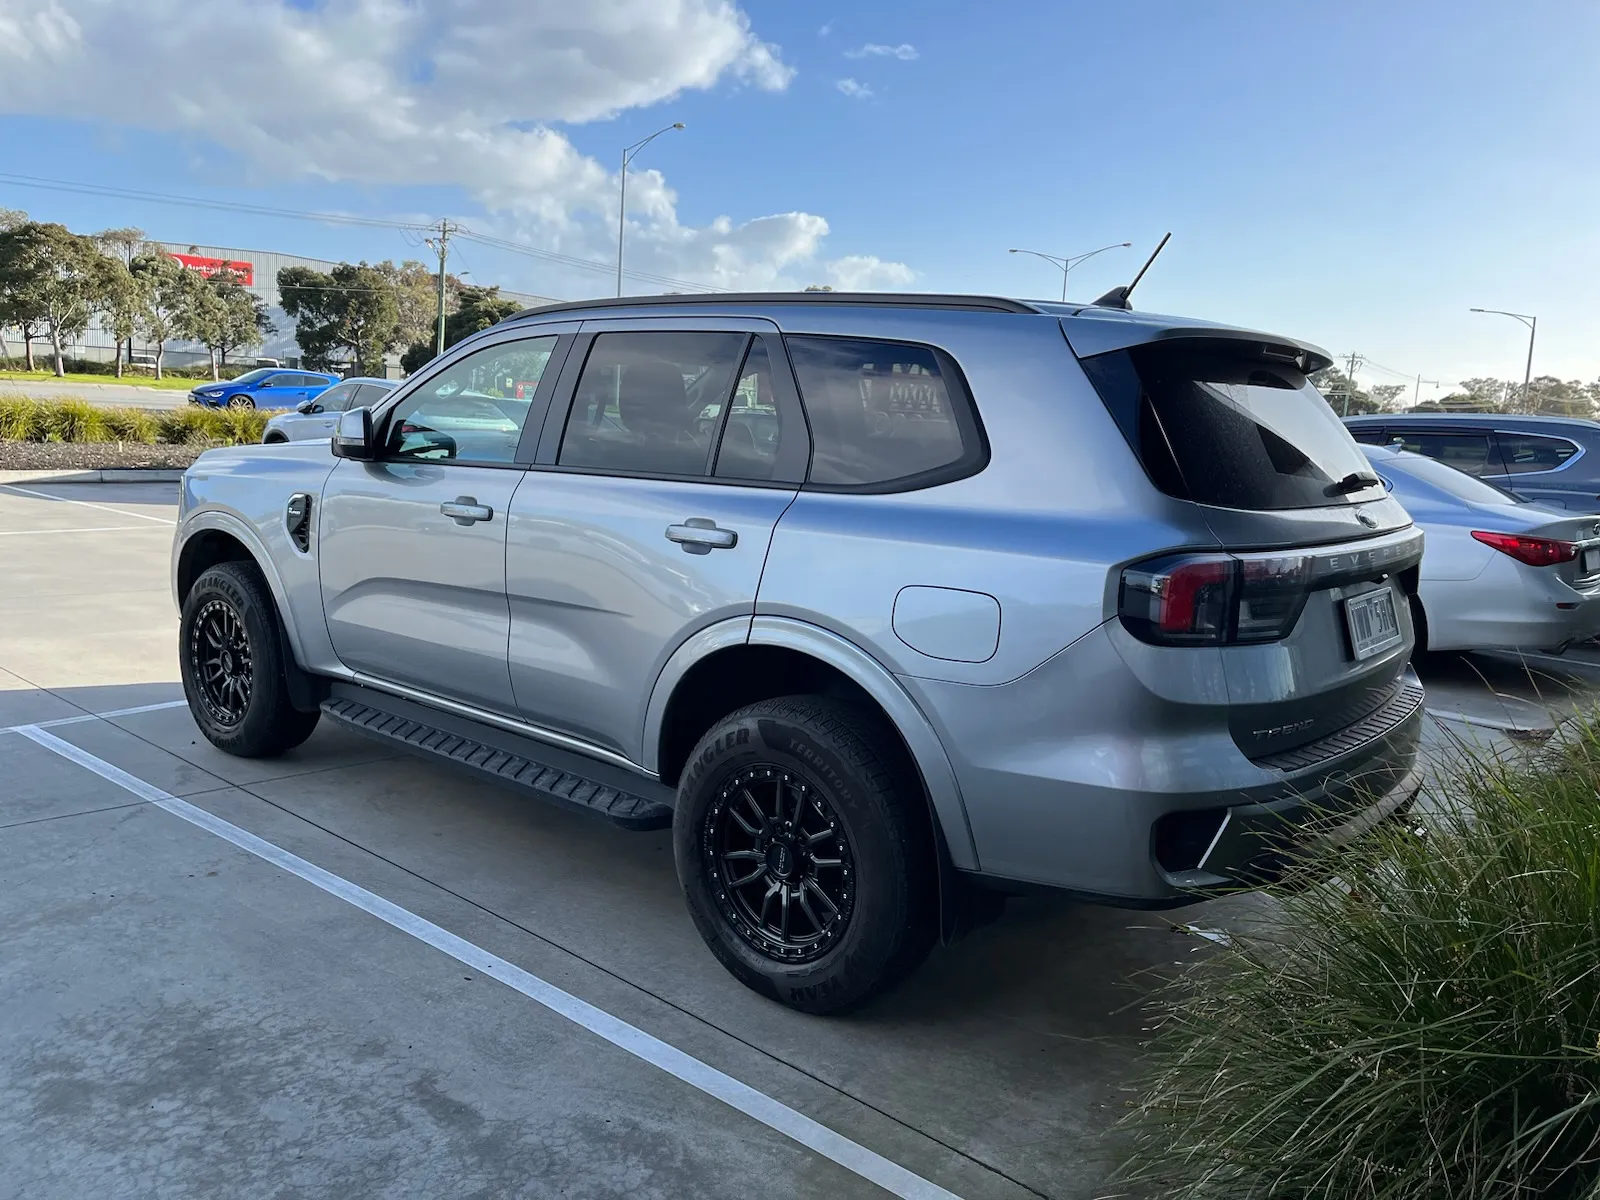 FORD EVEREST NEXT GEN with BR RAMBLER 18X9 WHEELS |  | FORD